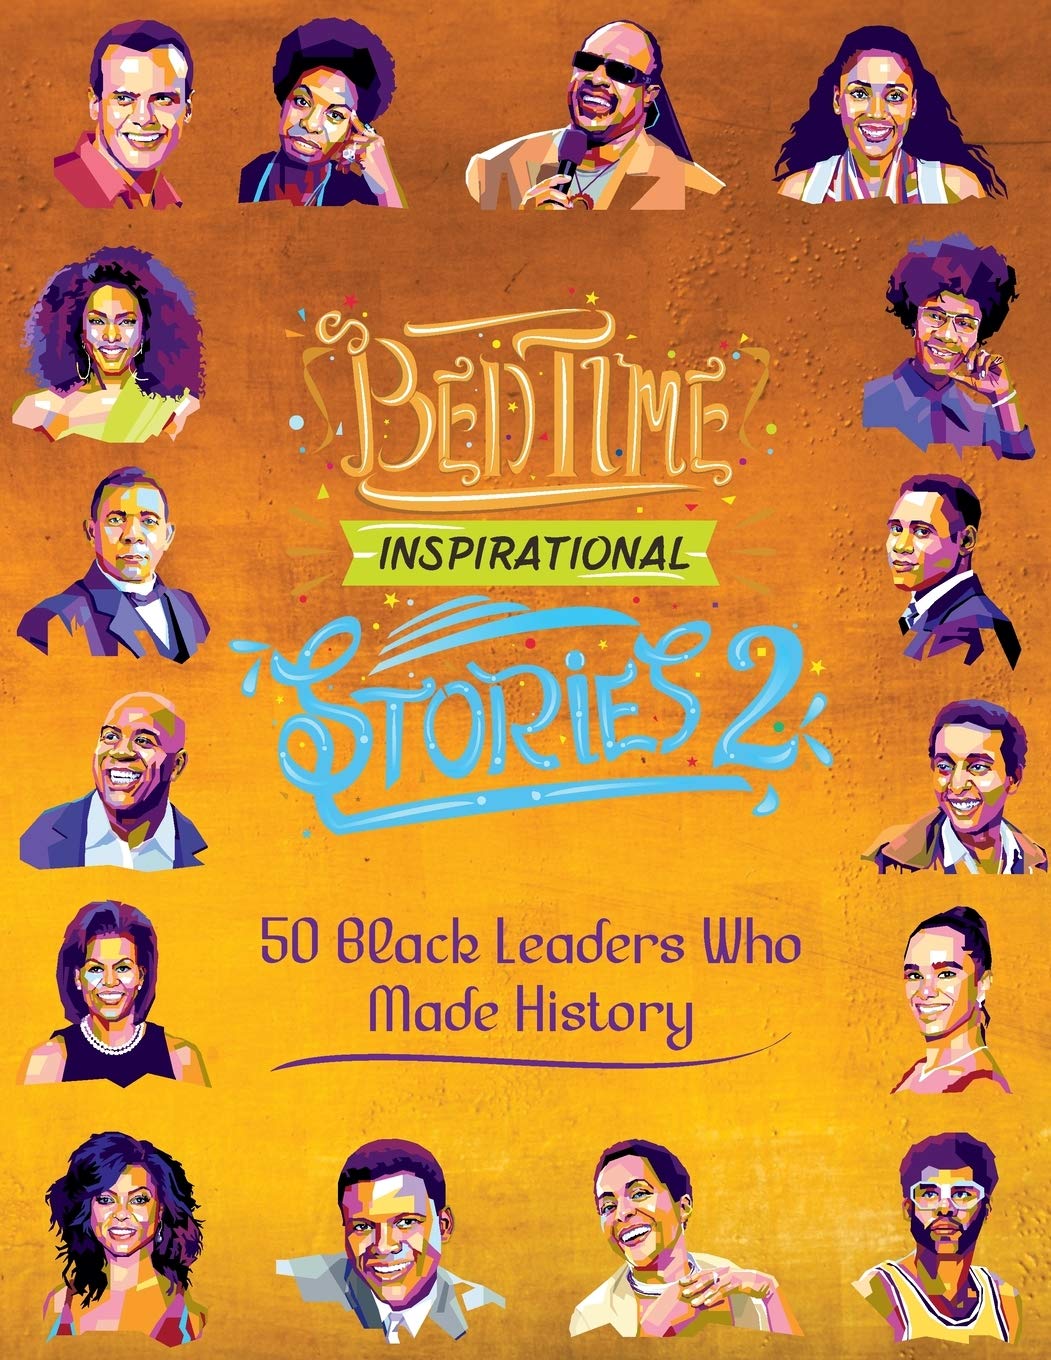 Bedtime Inspirational Stories - 50 Black Leaders who Made History: Black History Book for Kids ( Bedtime Inspirational Stories #2 )